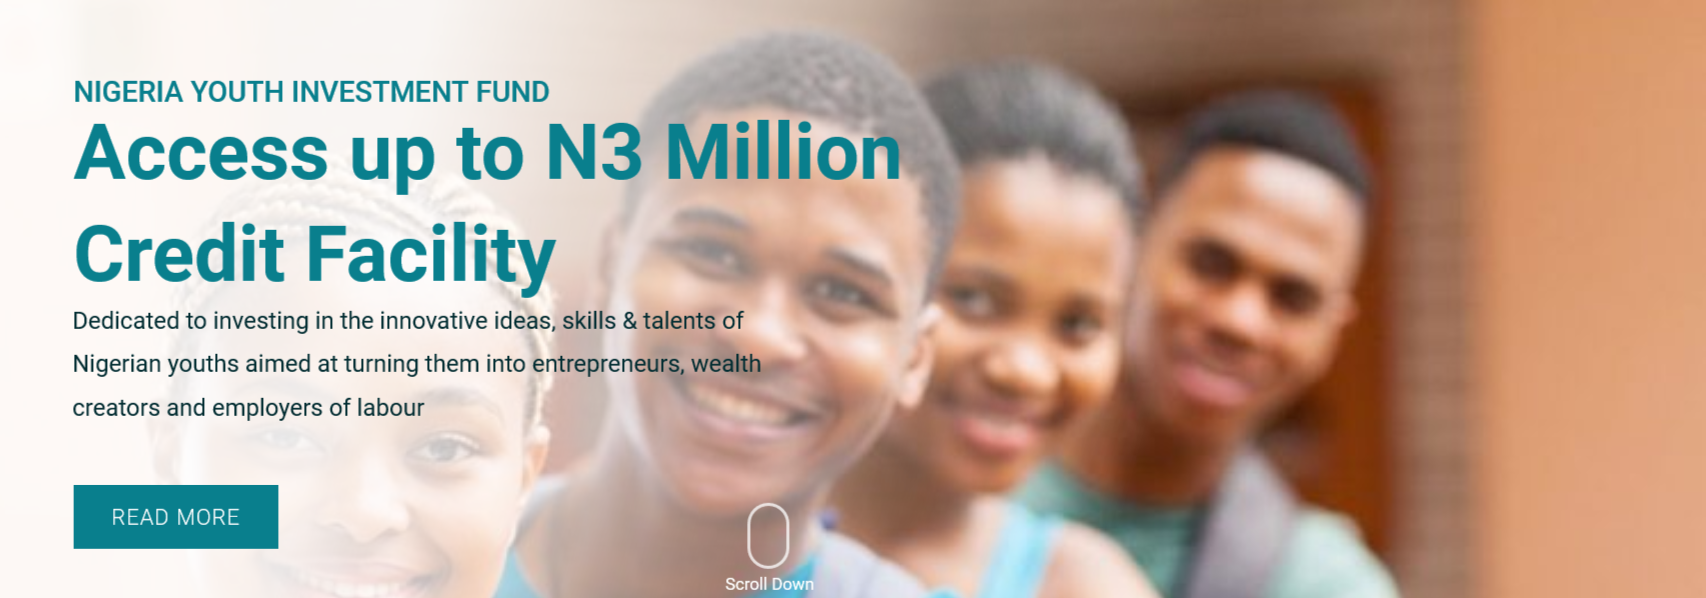 All You need to know about NIGERIA YOUTH INVESTMENT FUND PRODUCT PROGRAM